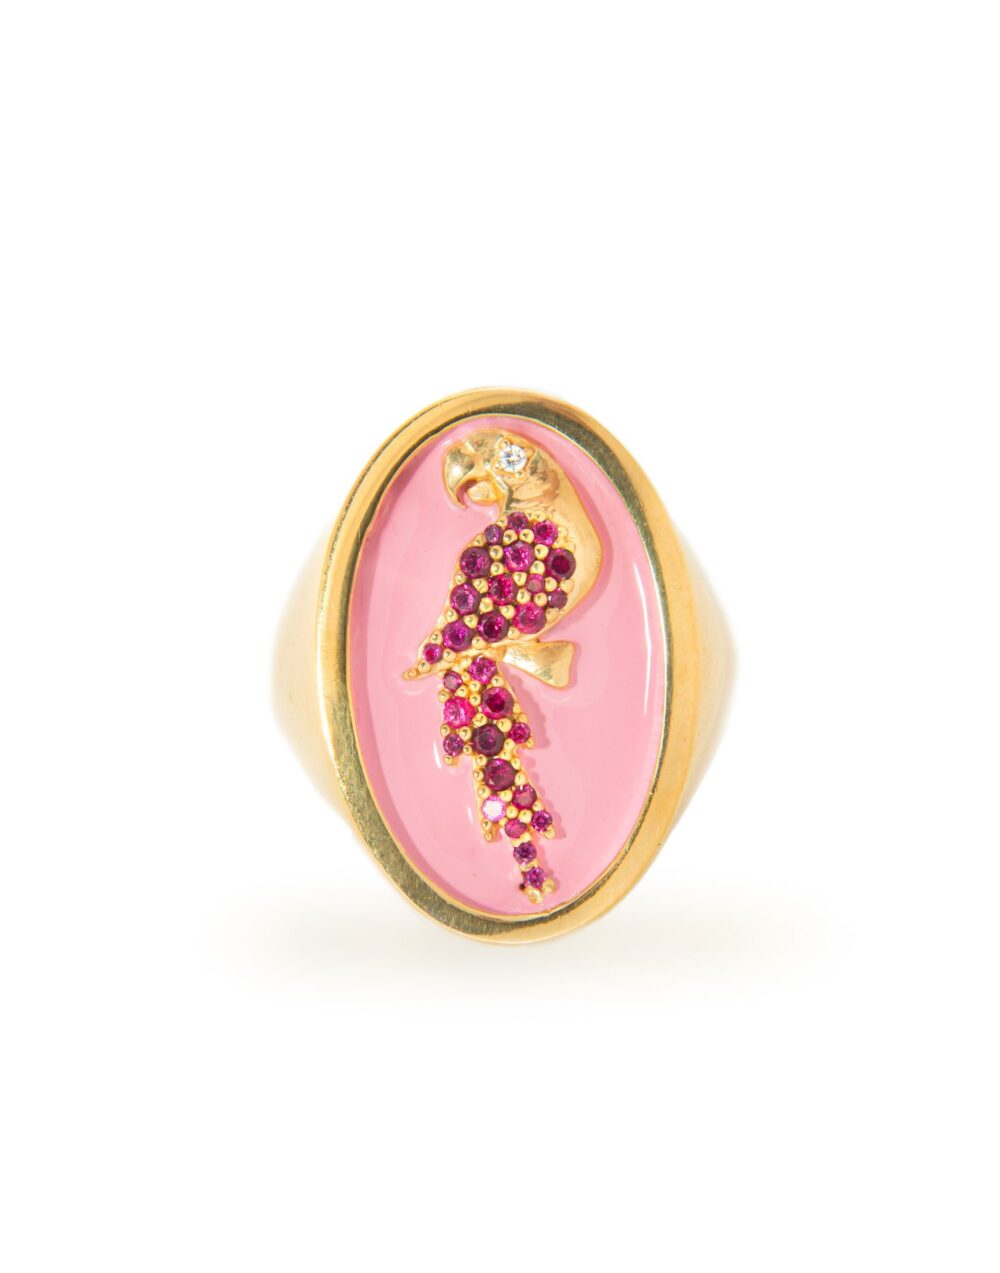 Rose Enamelled Chevalier Parrot ring in gold-plated silver. Thais Bernardes Jewellery